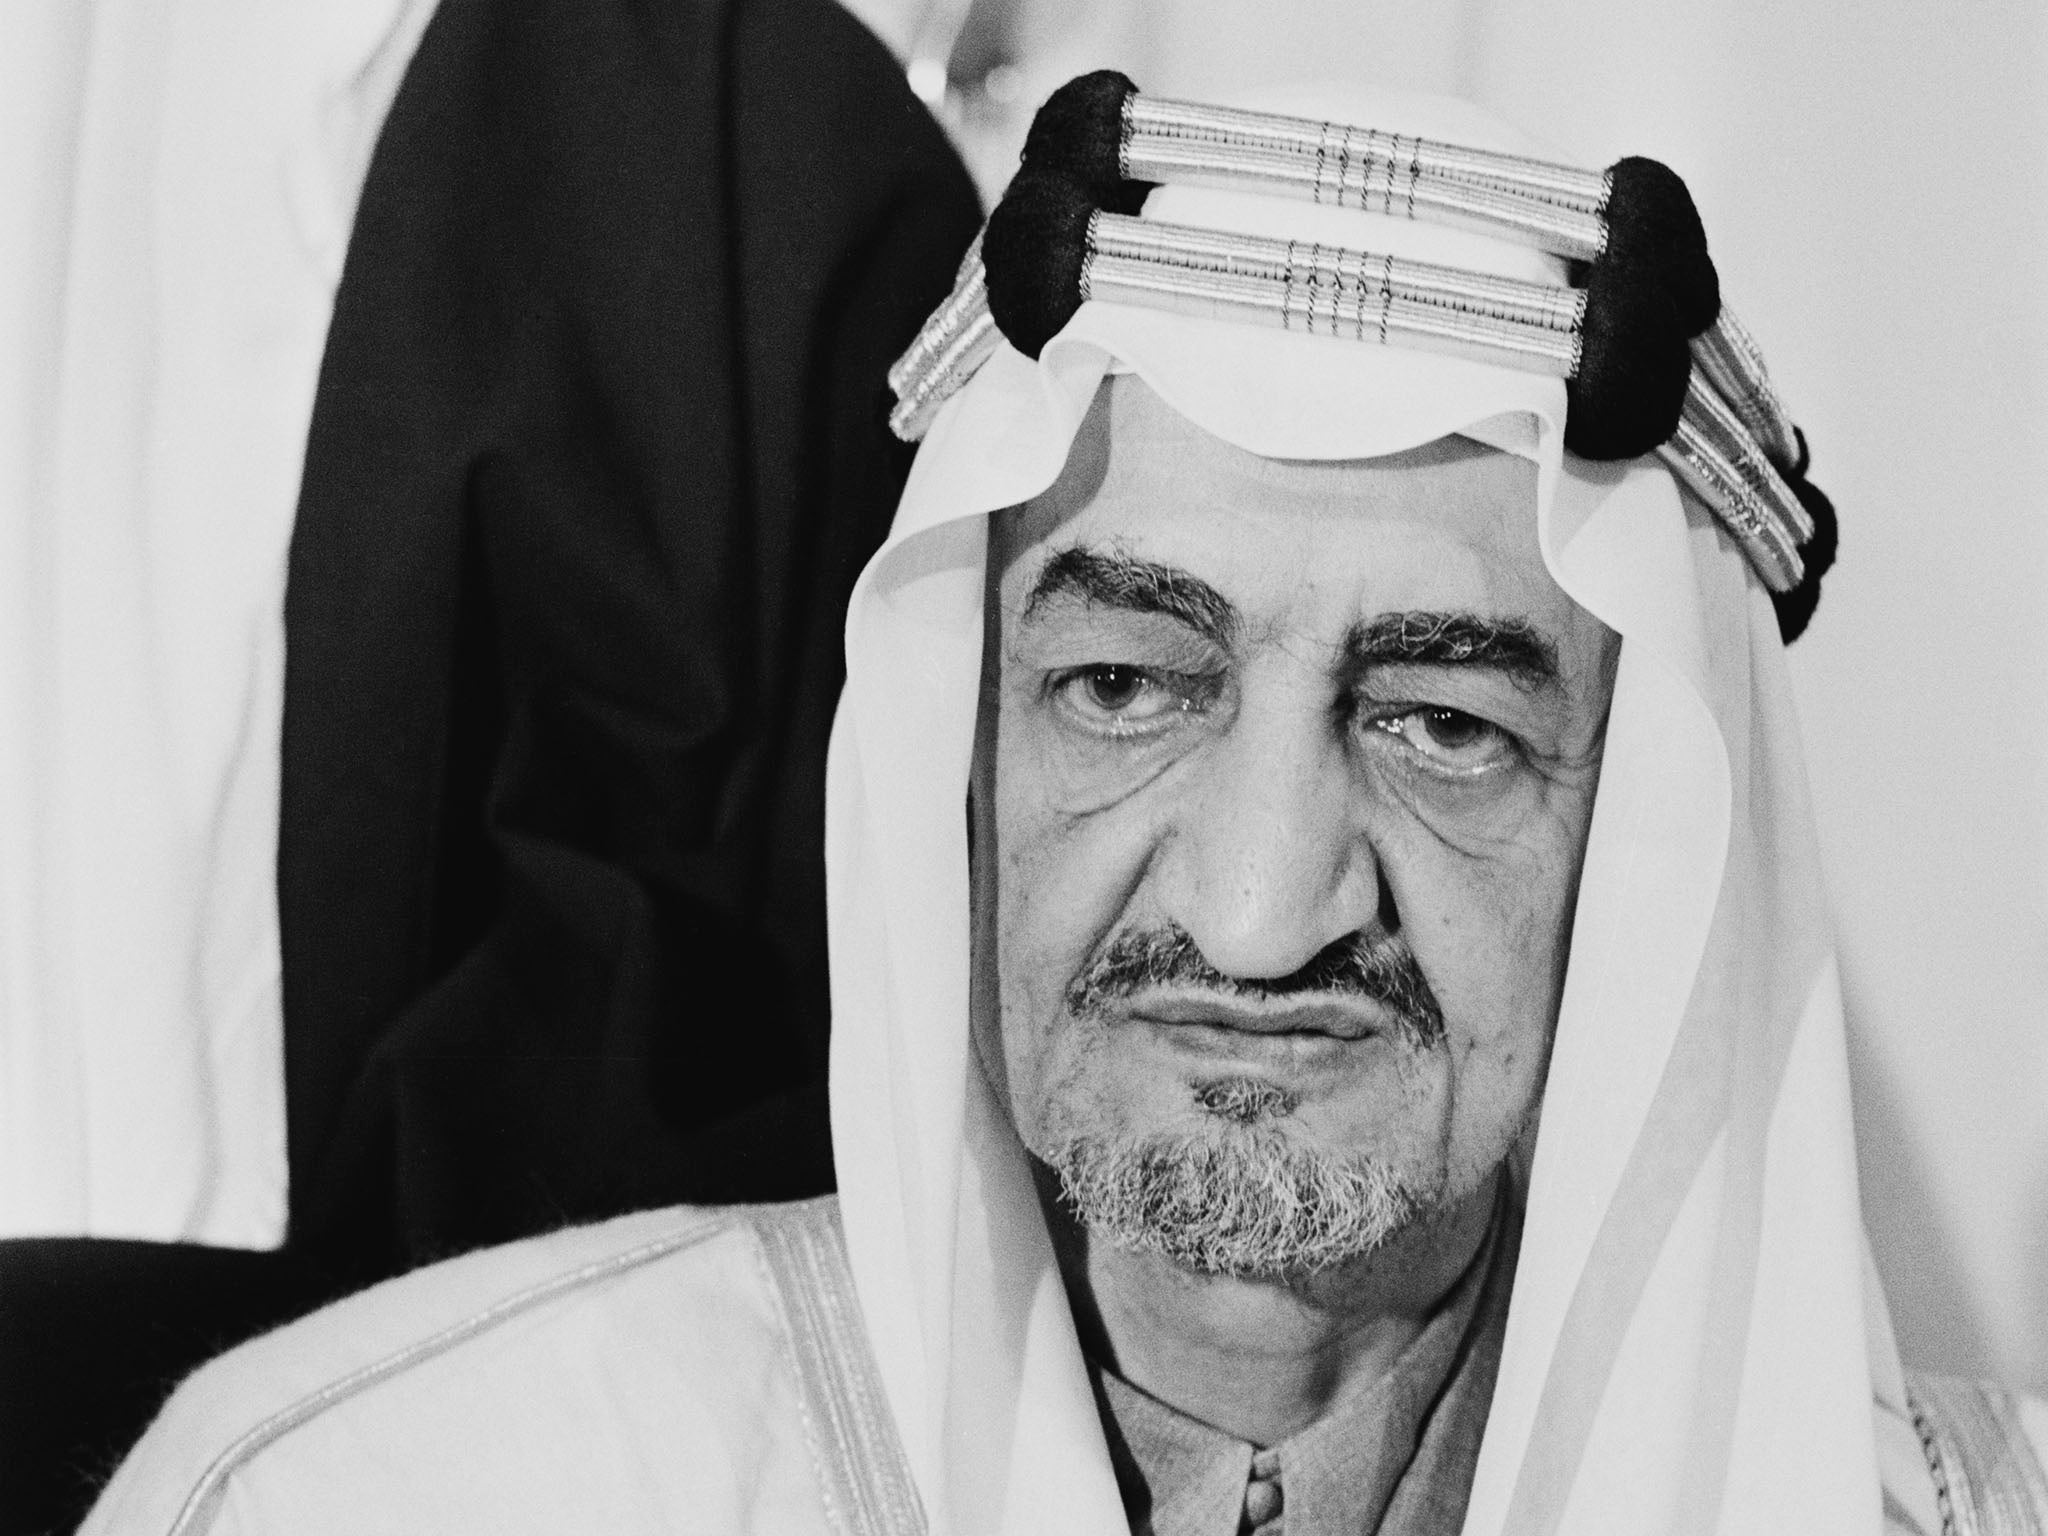 King Faisal of Saudi Arabia, who was assassinated on 25 March 1975 by his nephew